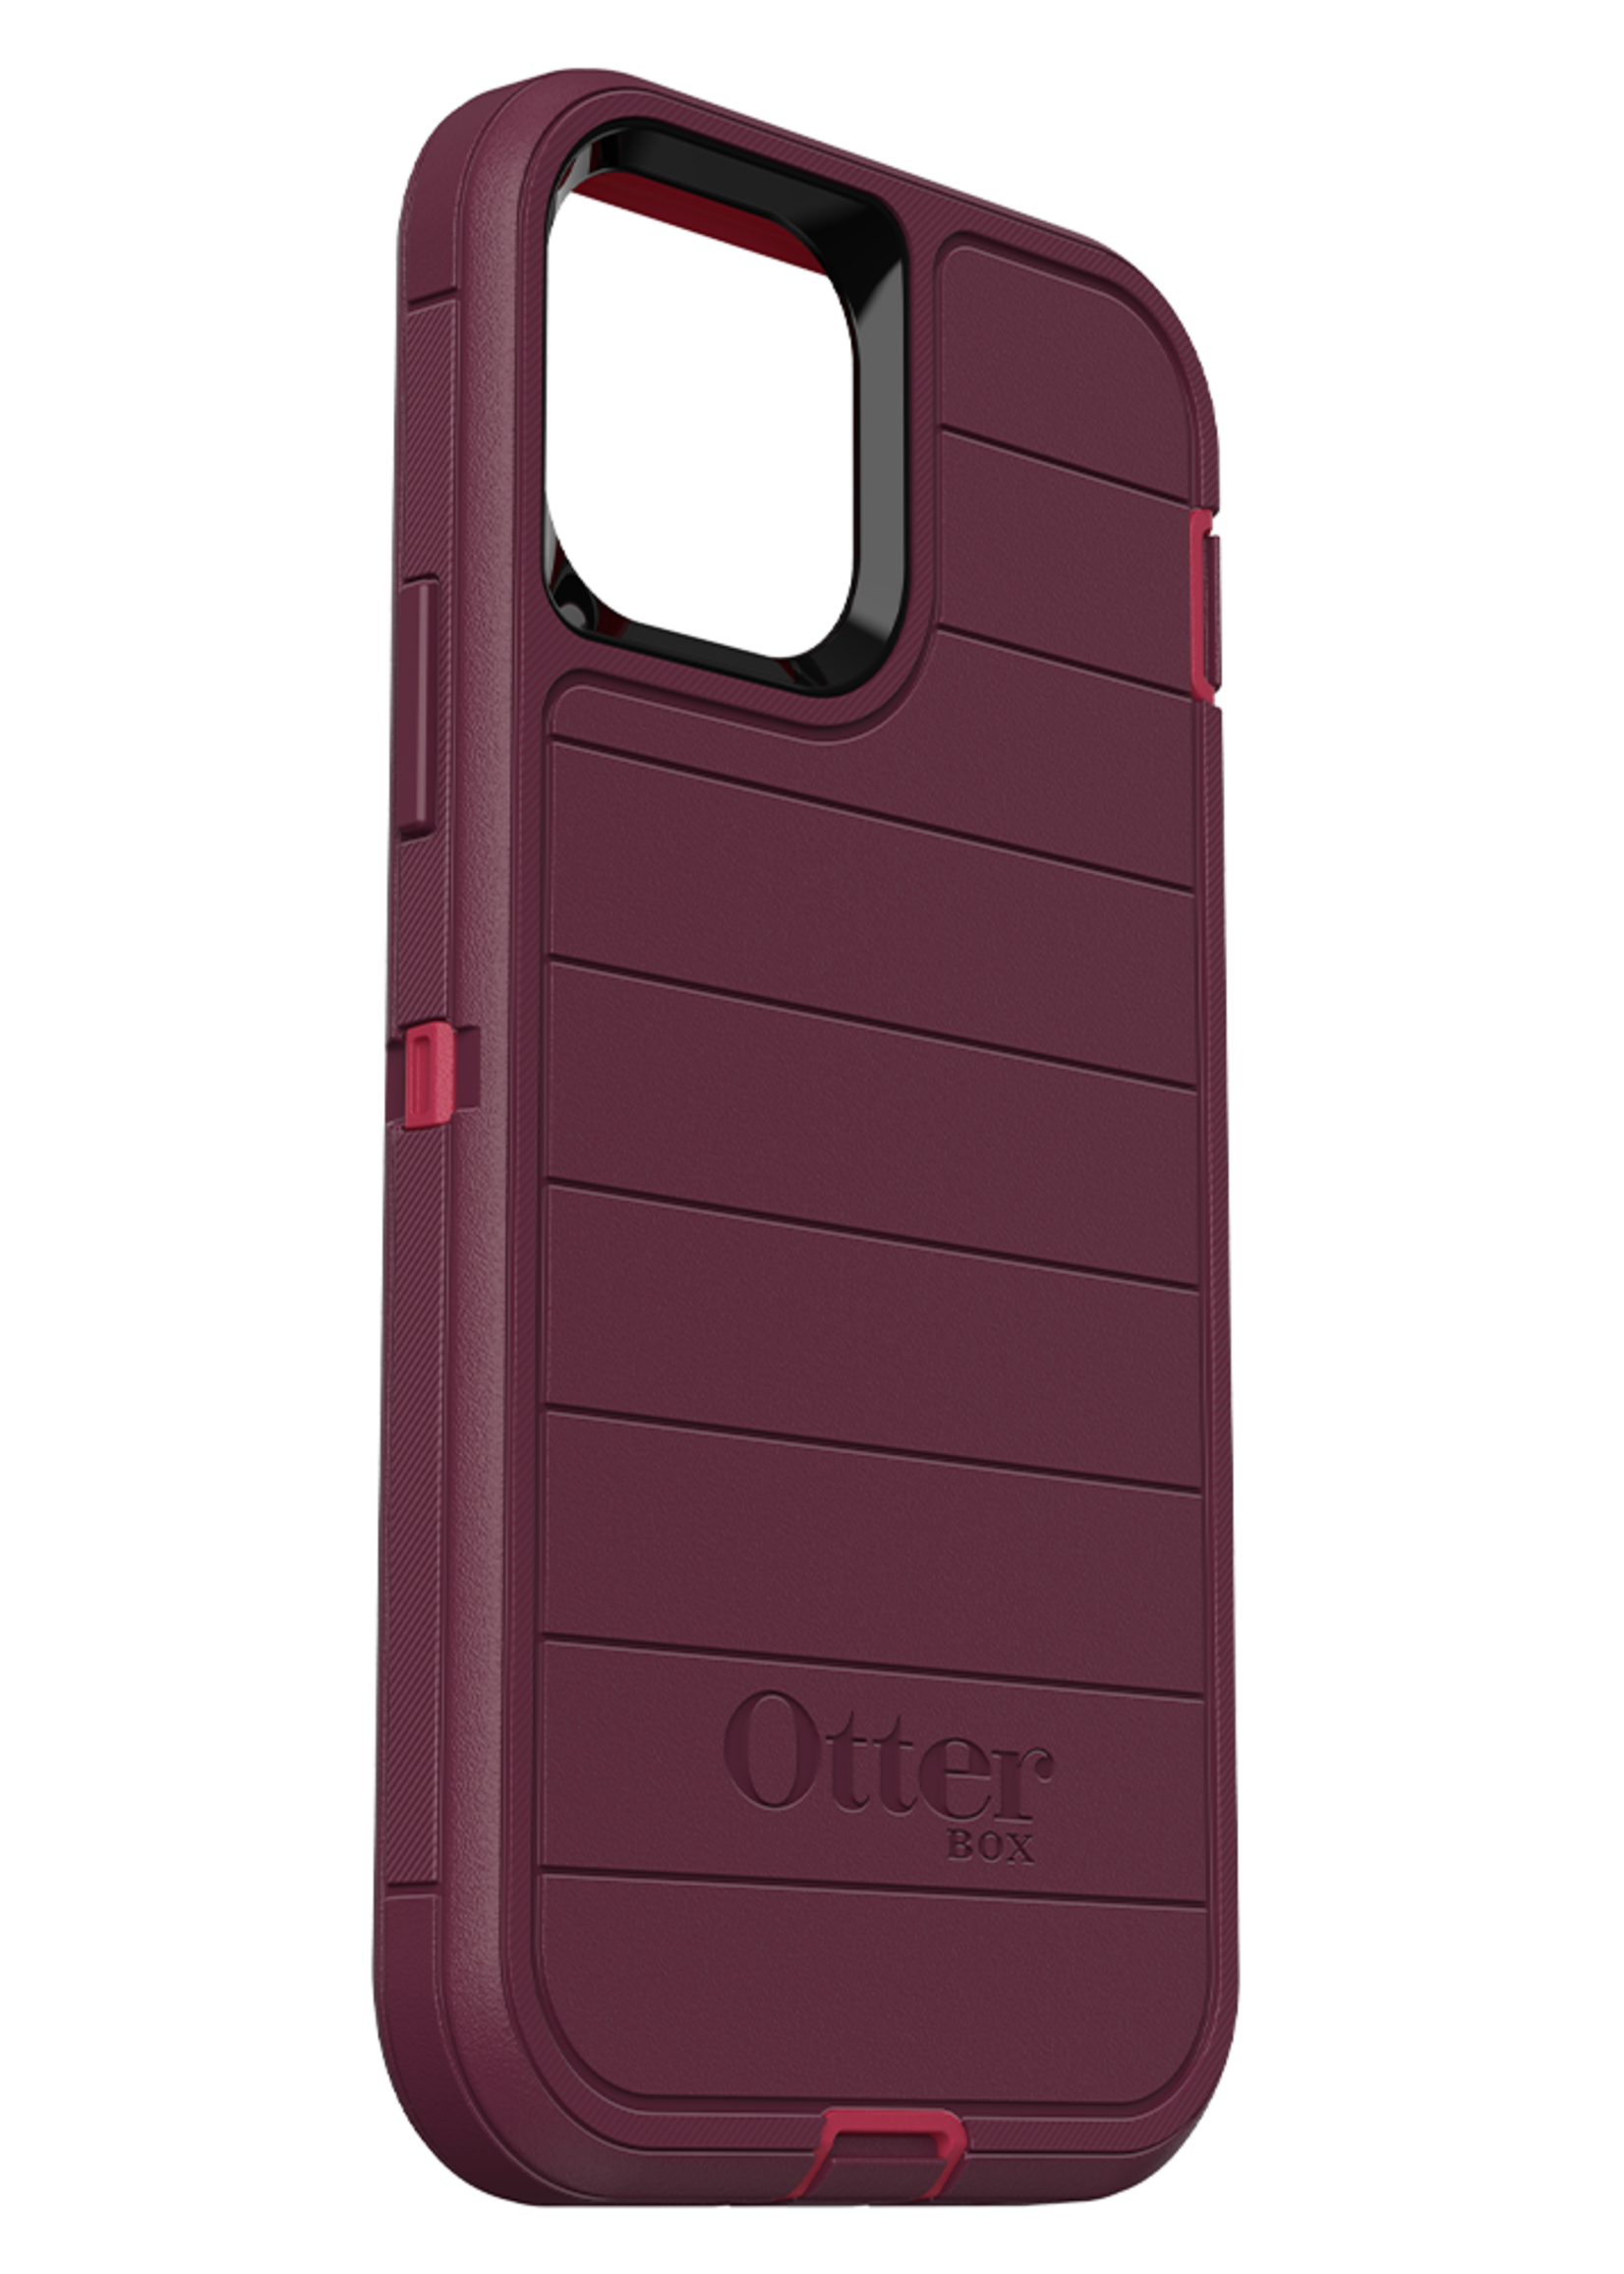 Otterbox OtterBox - Defender Pro Case for Apple iPhone 12 / 12 Pro - Berry Potion